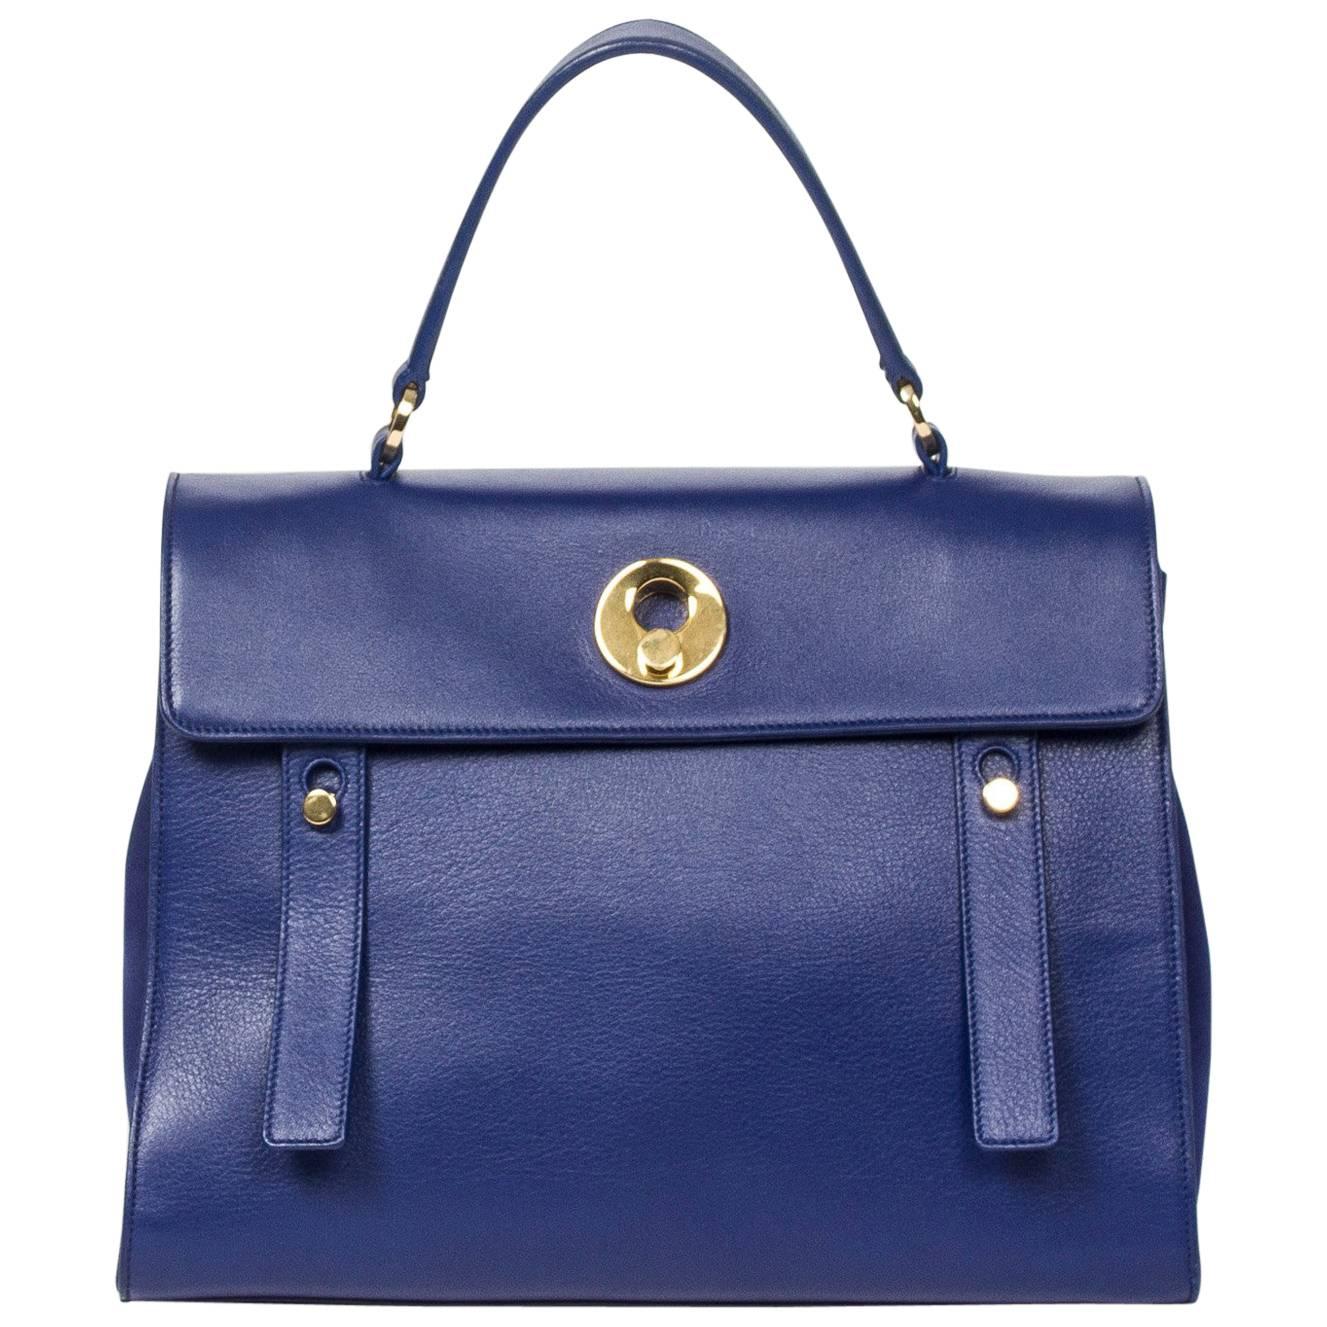 Yves Saint Laurent Muse 2 New Model in Blue calf leather